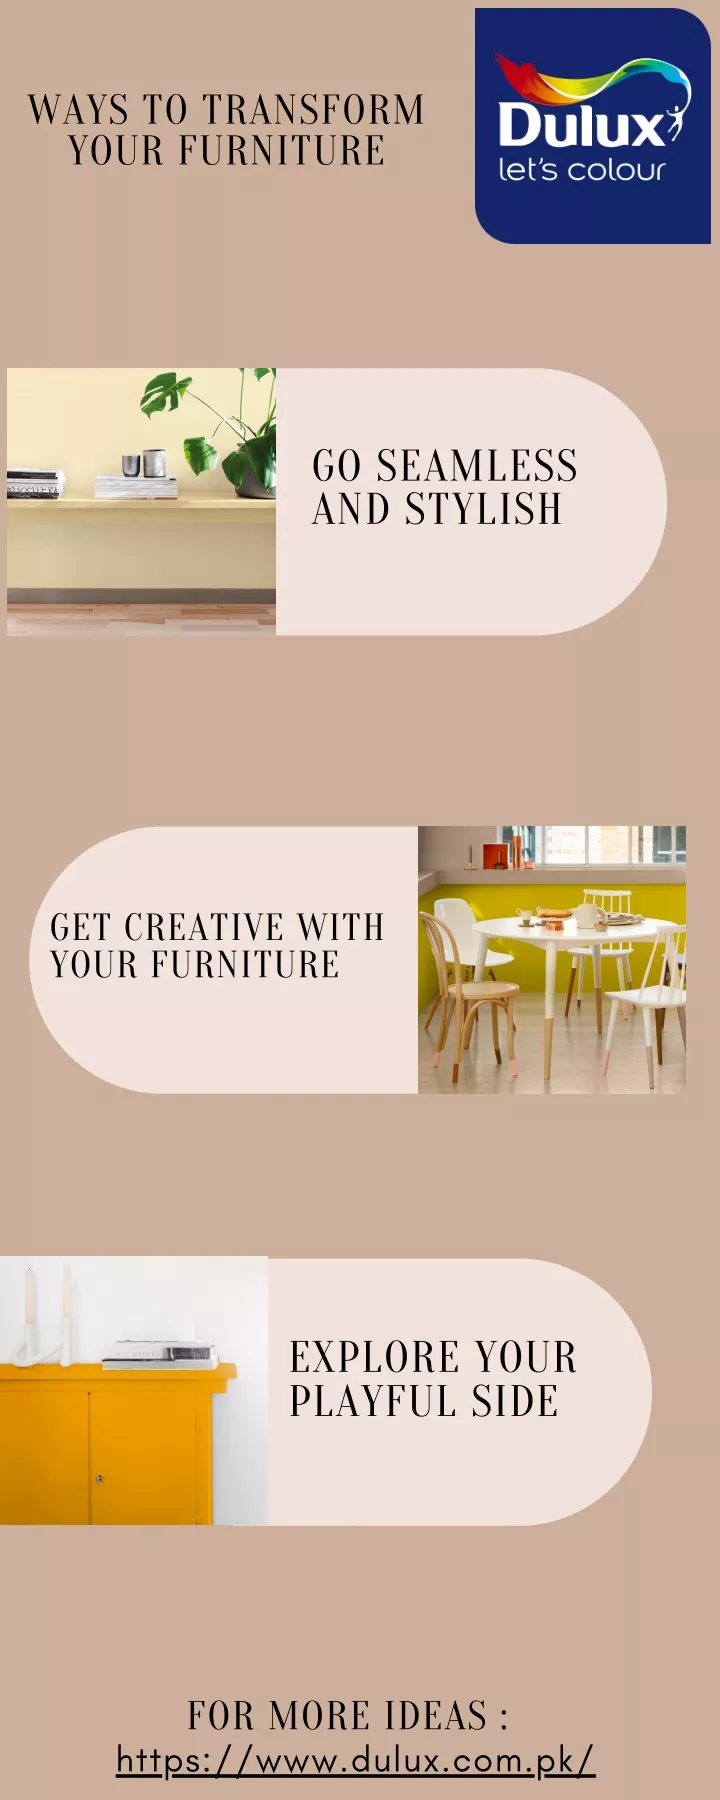 ways to transform your furniture